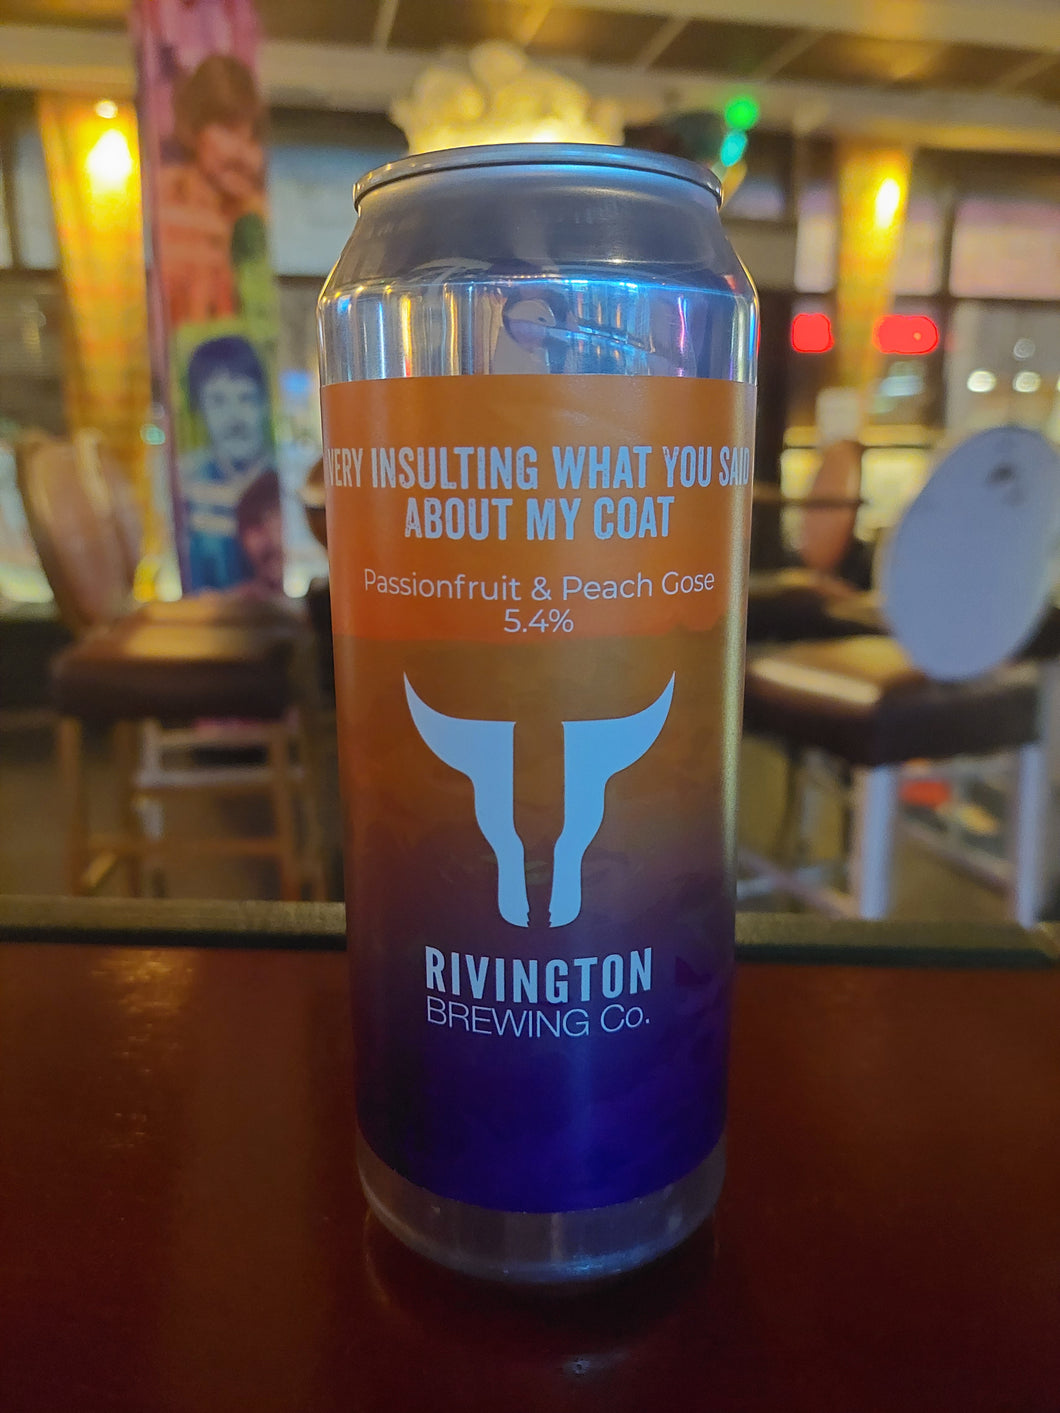 Rivington Brewing Co. Very insulting what you said about my goat